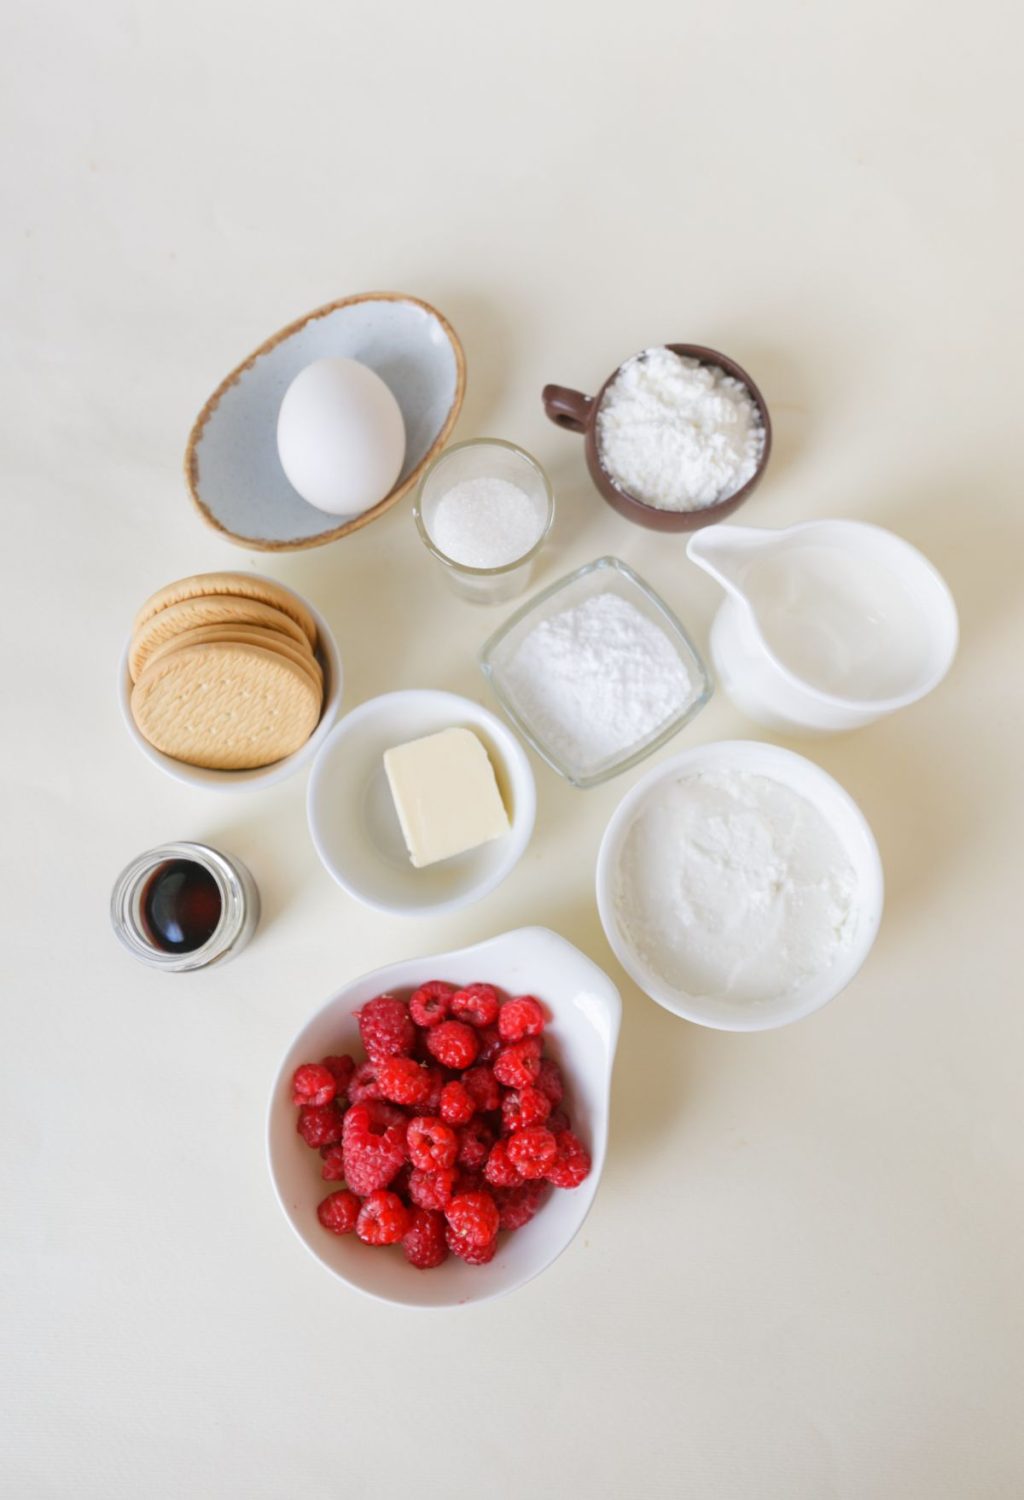 The ingredients for raspberry cookies are laid out on a table.